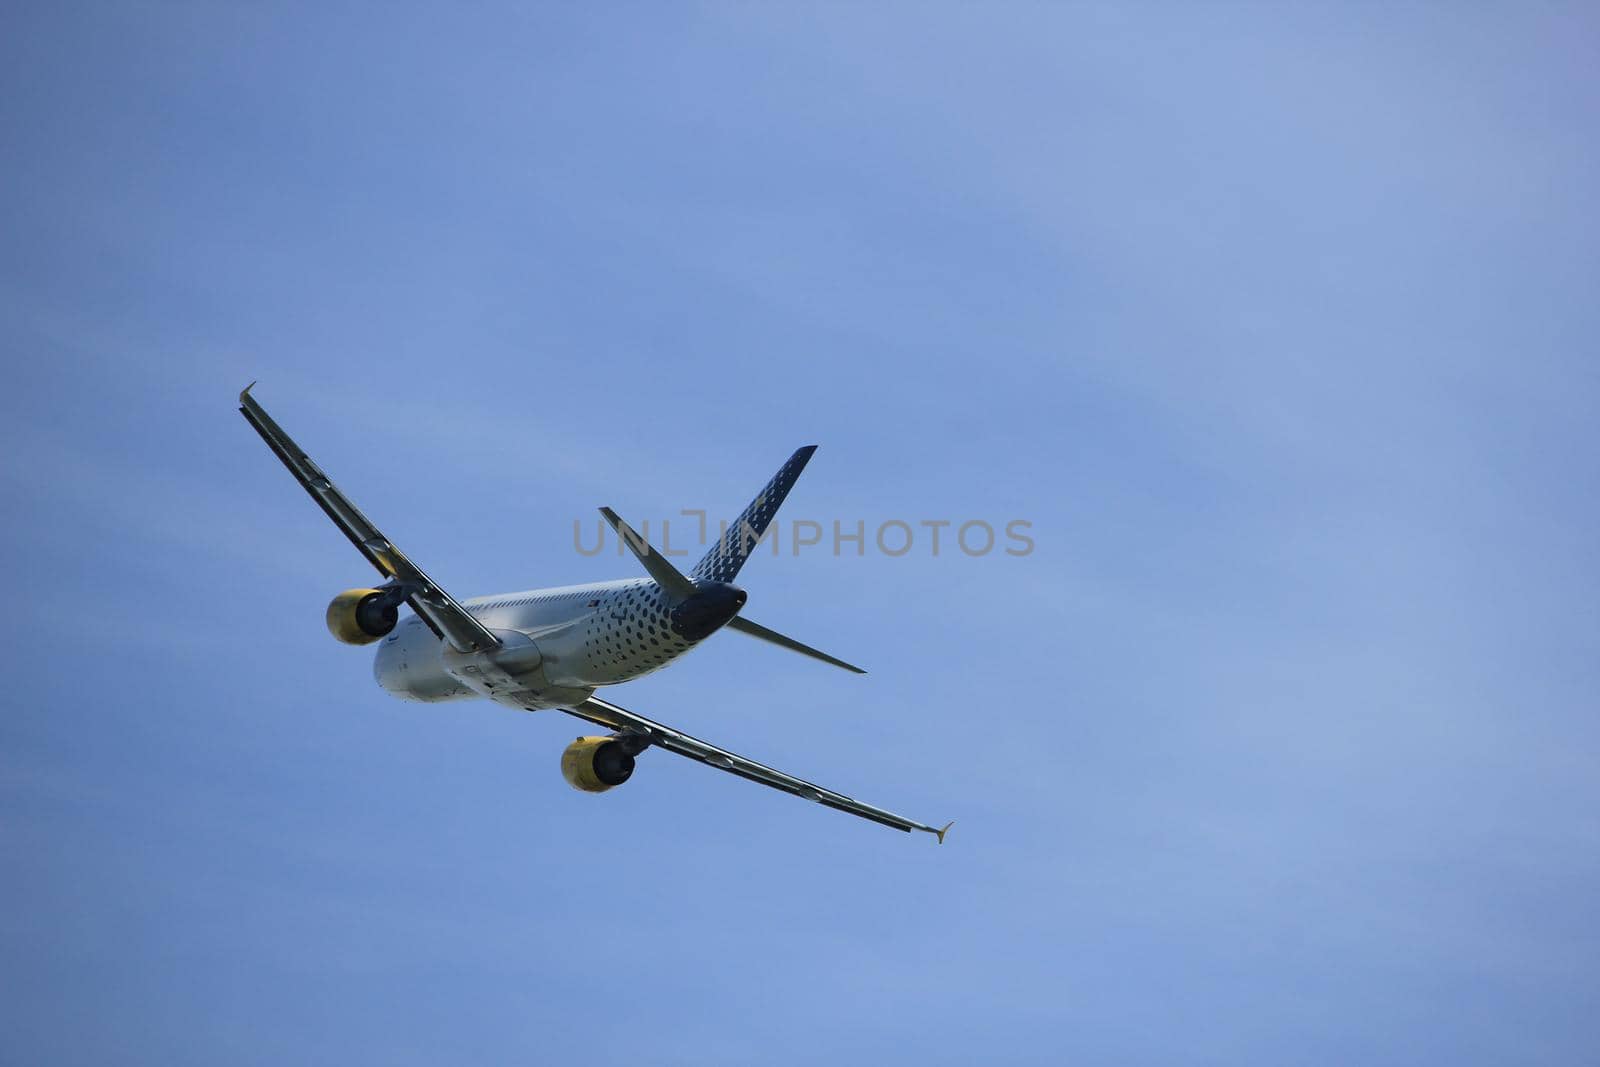 Amsterdam the Netherlands - July, 9th 2017: EC-MBF Vueling Airbus A320-200 takeoff from Buitenveldert runway Amsterdam Airport